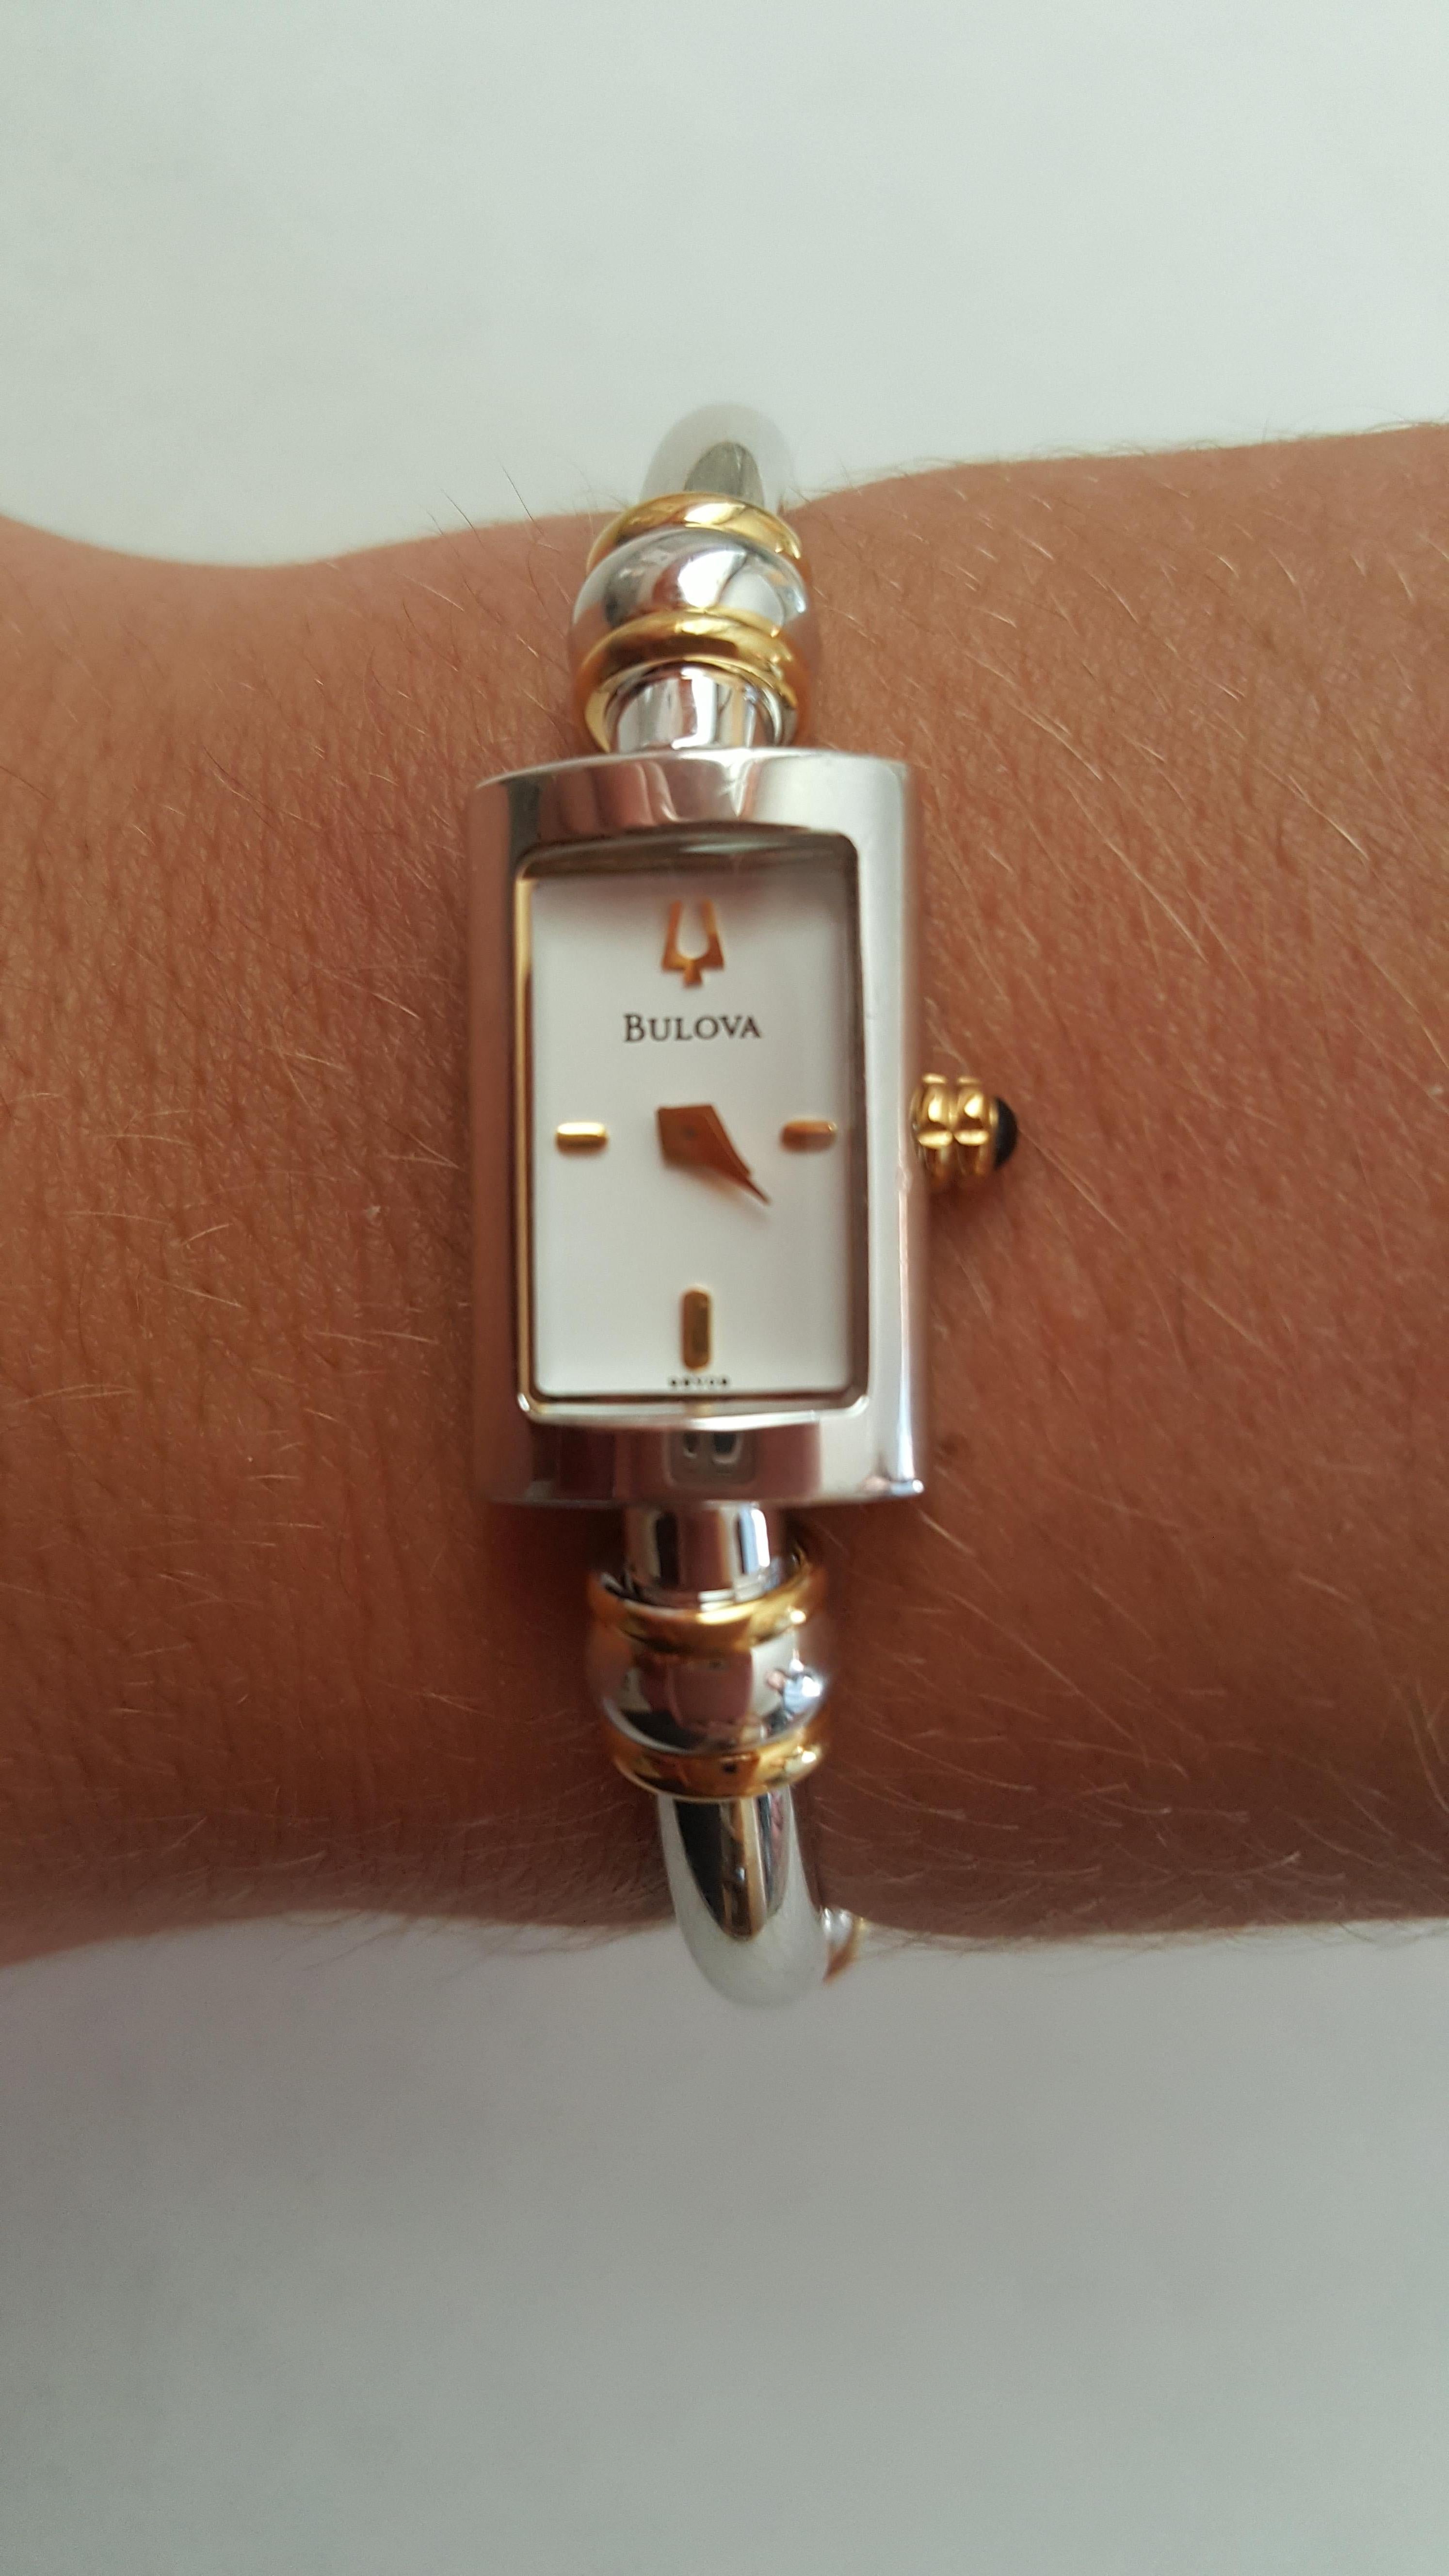 Bulova Ladies Bangle Watch, Model 98V09, Like New. Stainless Steel Case and Bracelet, 14mm by 23 mm, White Face, Water Resistant, Quartz. The watch look as though it may not have been worn, or just a few times.

 White dial with gold-tone hands.